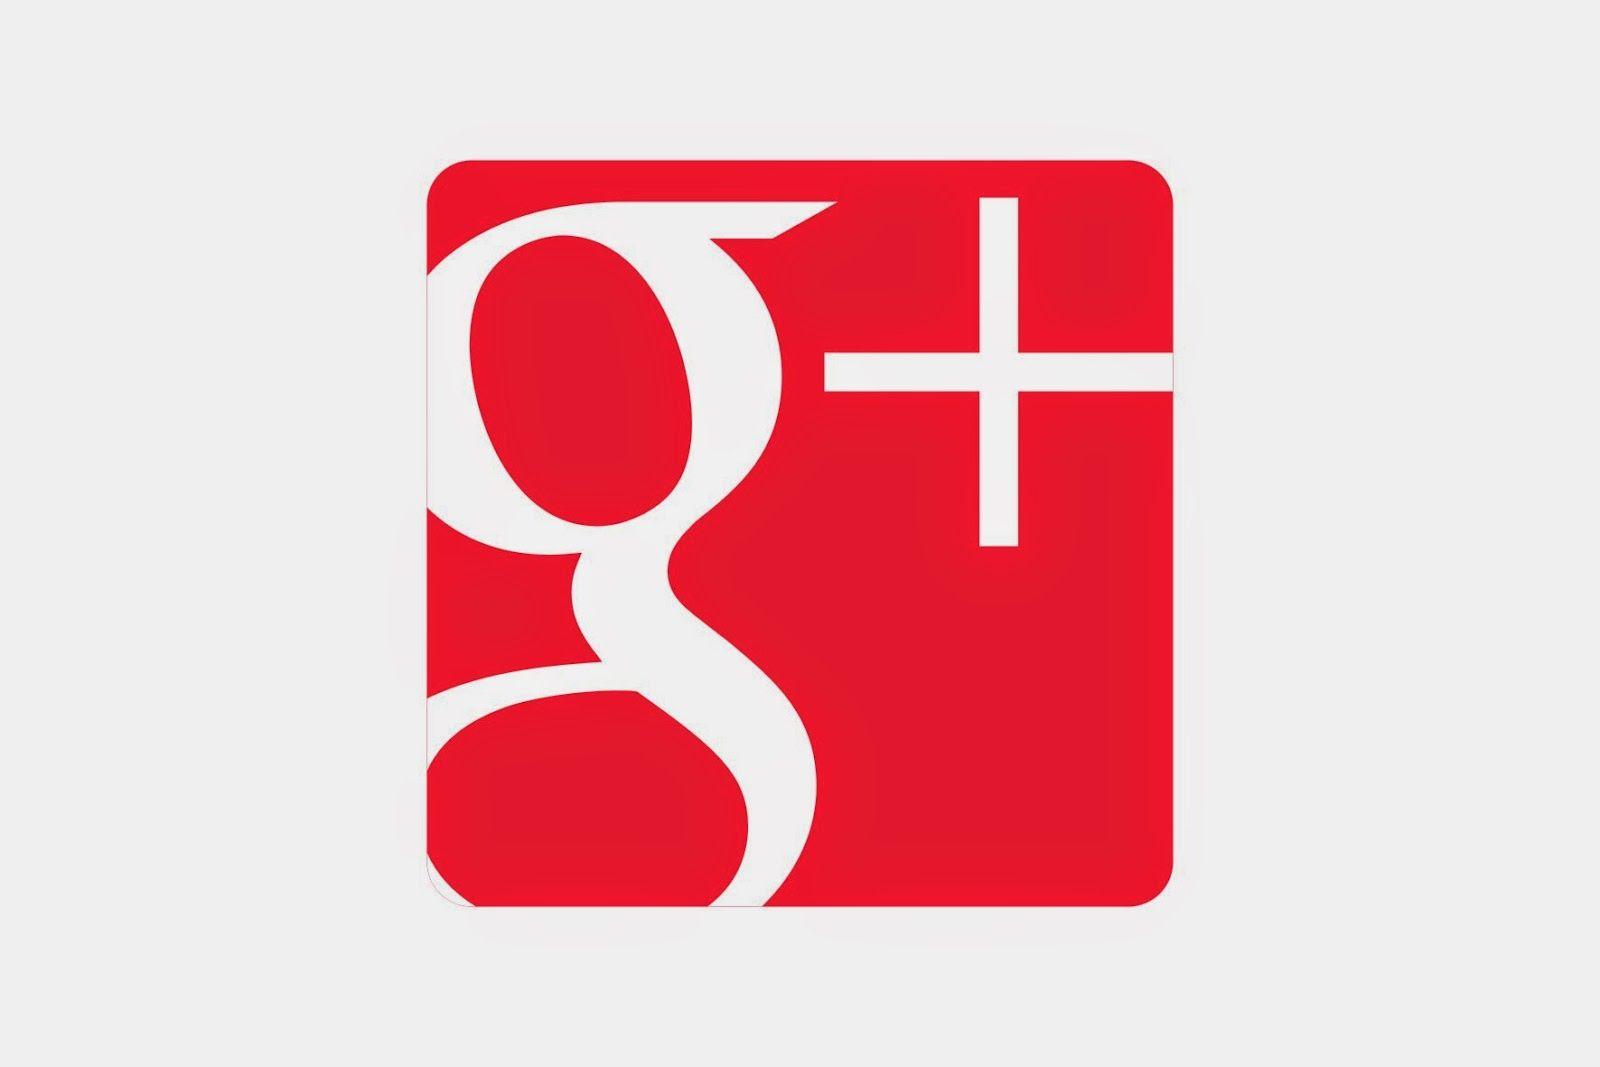 G Plus Logo - Google Plus Logo Transparent PNG Pictures - Free Icons and PNG ...